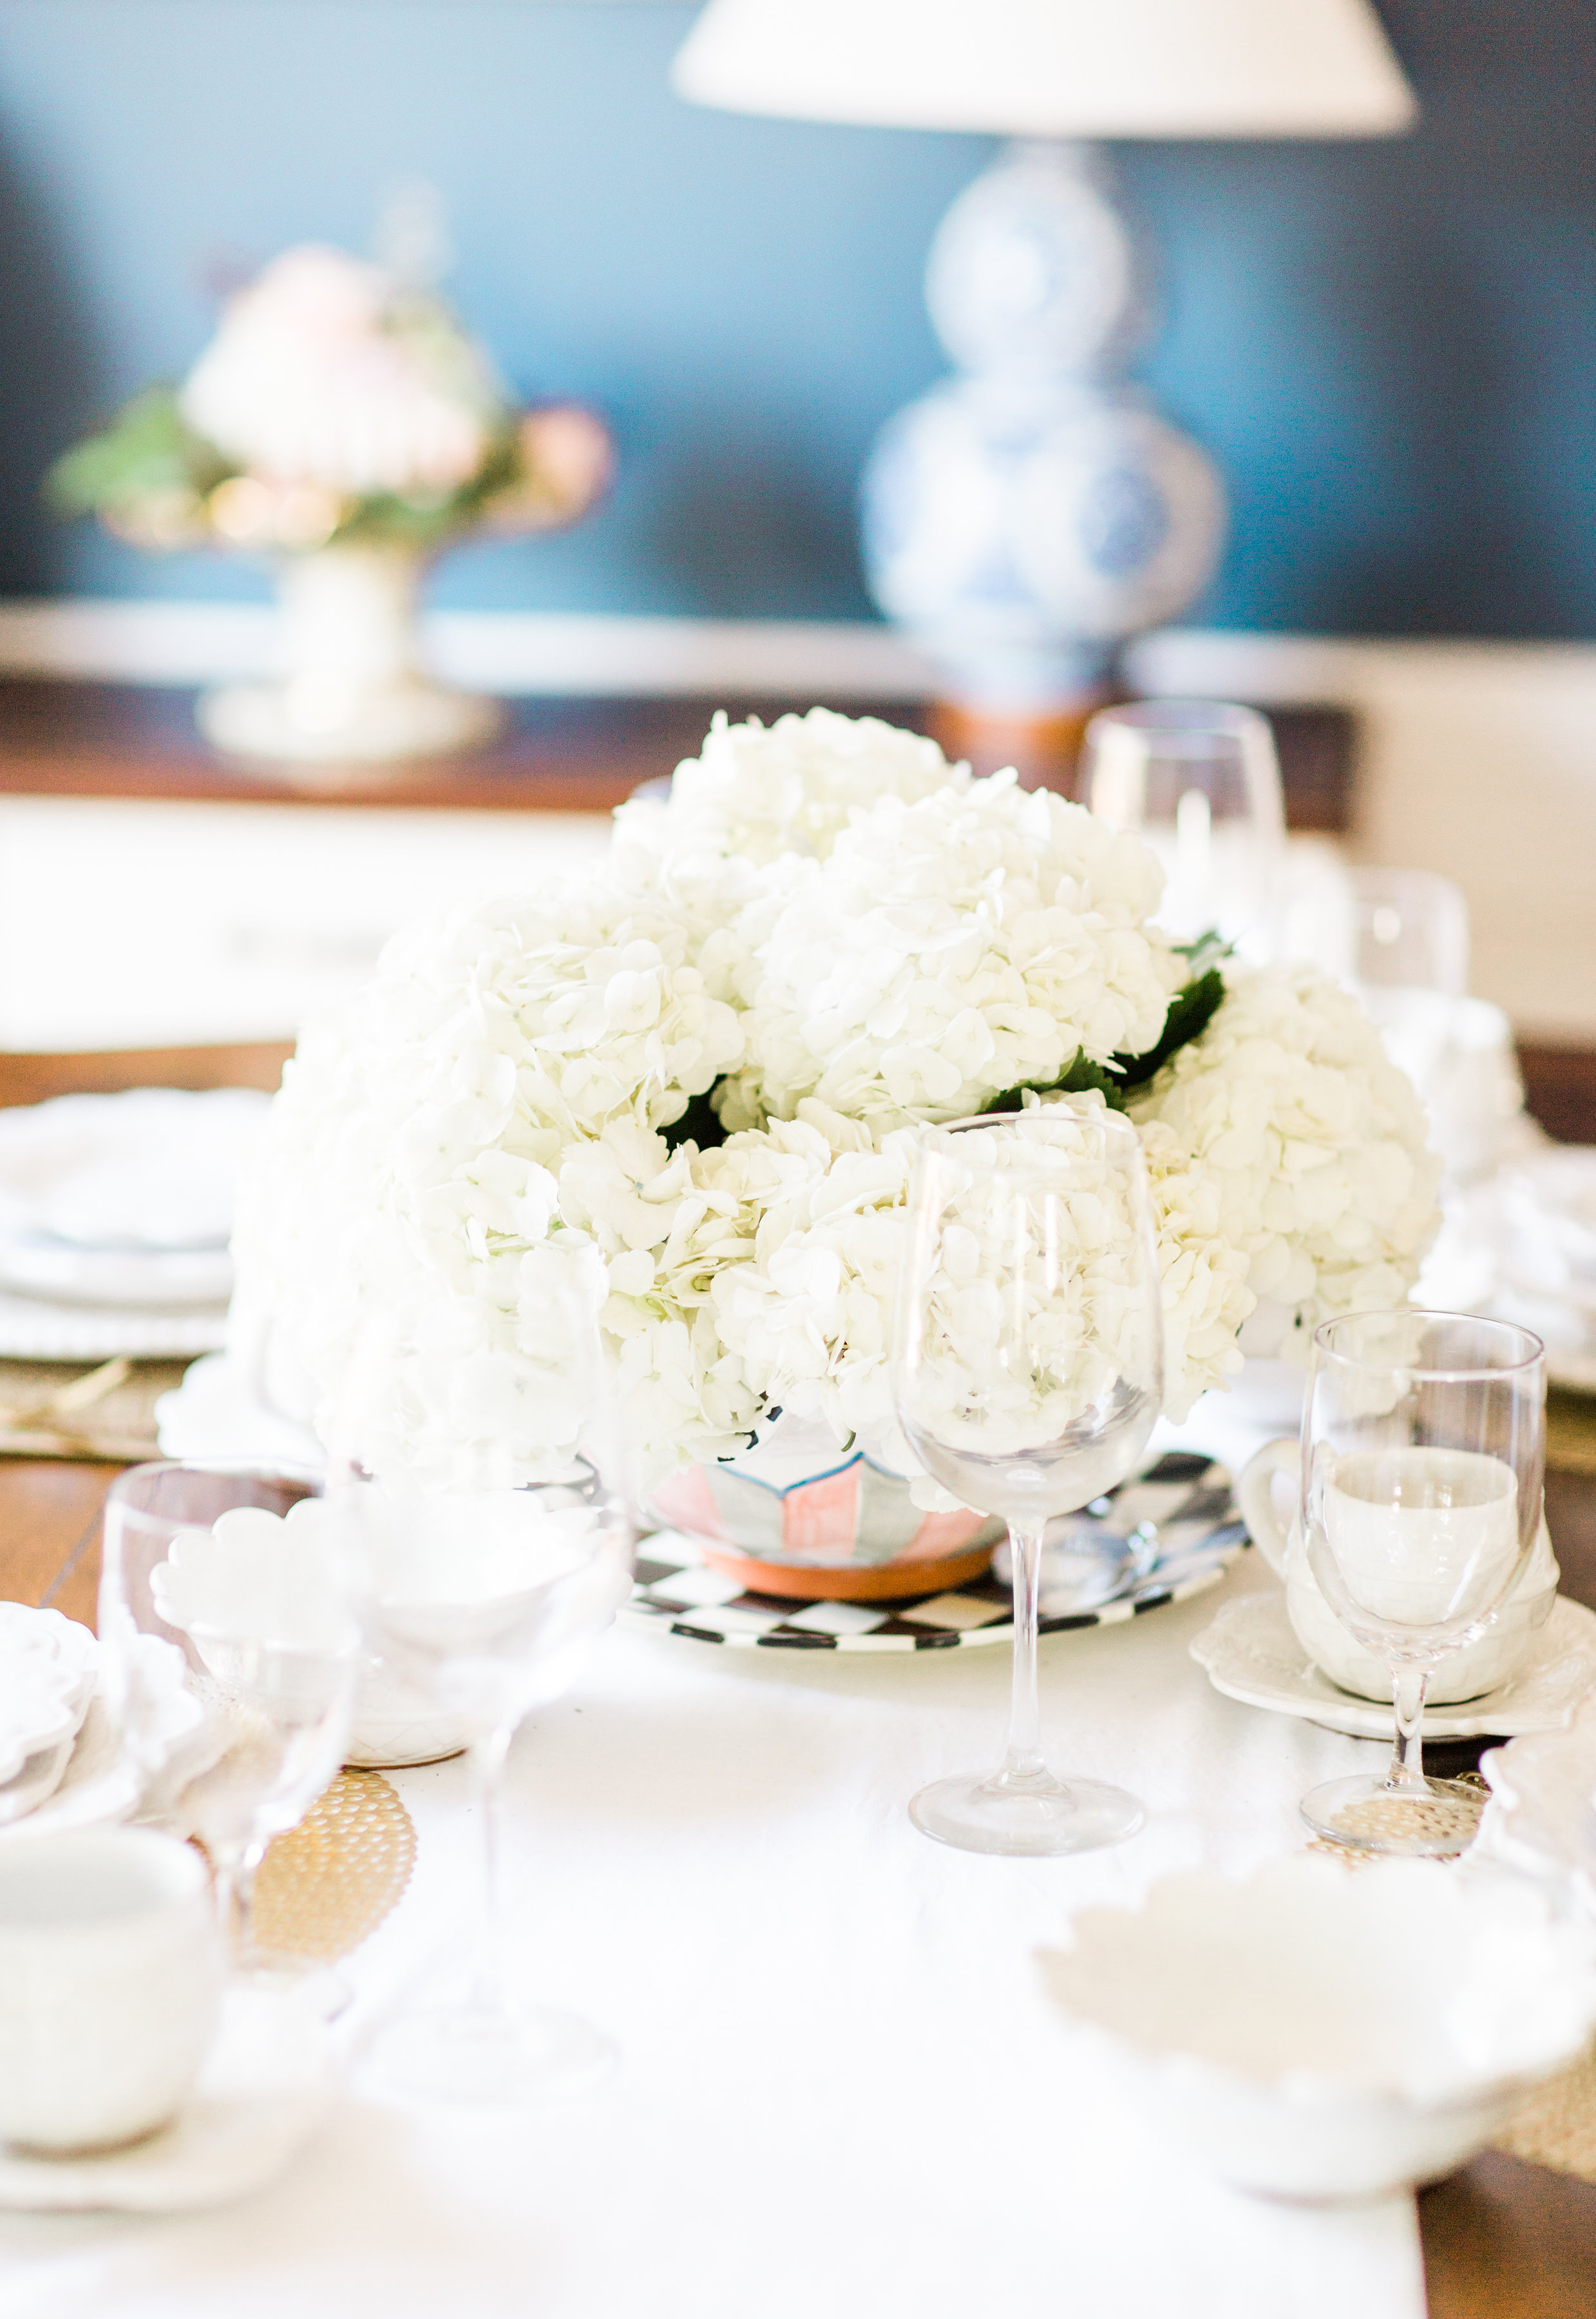 3 Easy Centerpiece Ideas for Your Next Gathering featured by popular North Carolina life and style blogger Coffee Beans and Bobby Pins